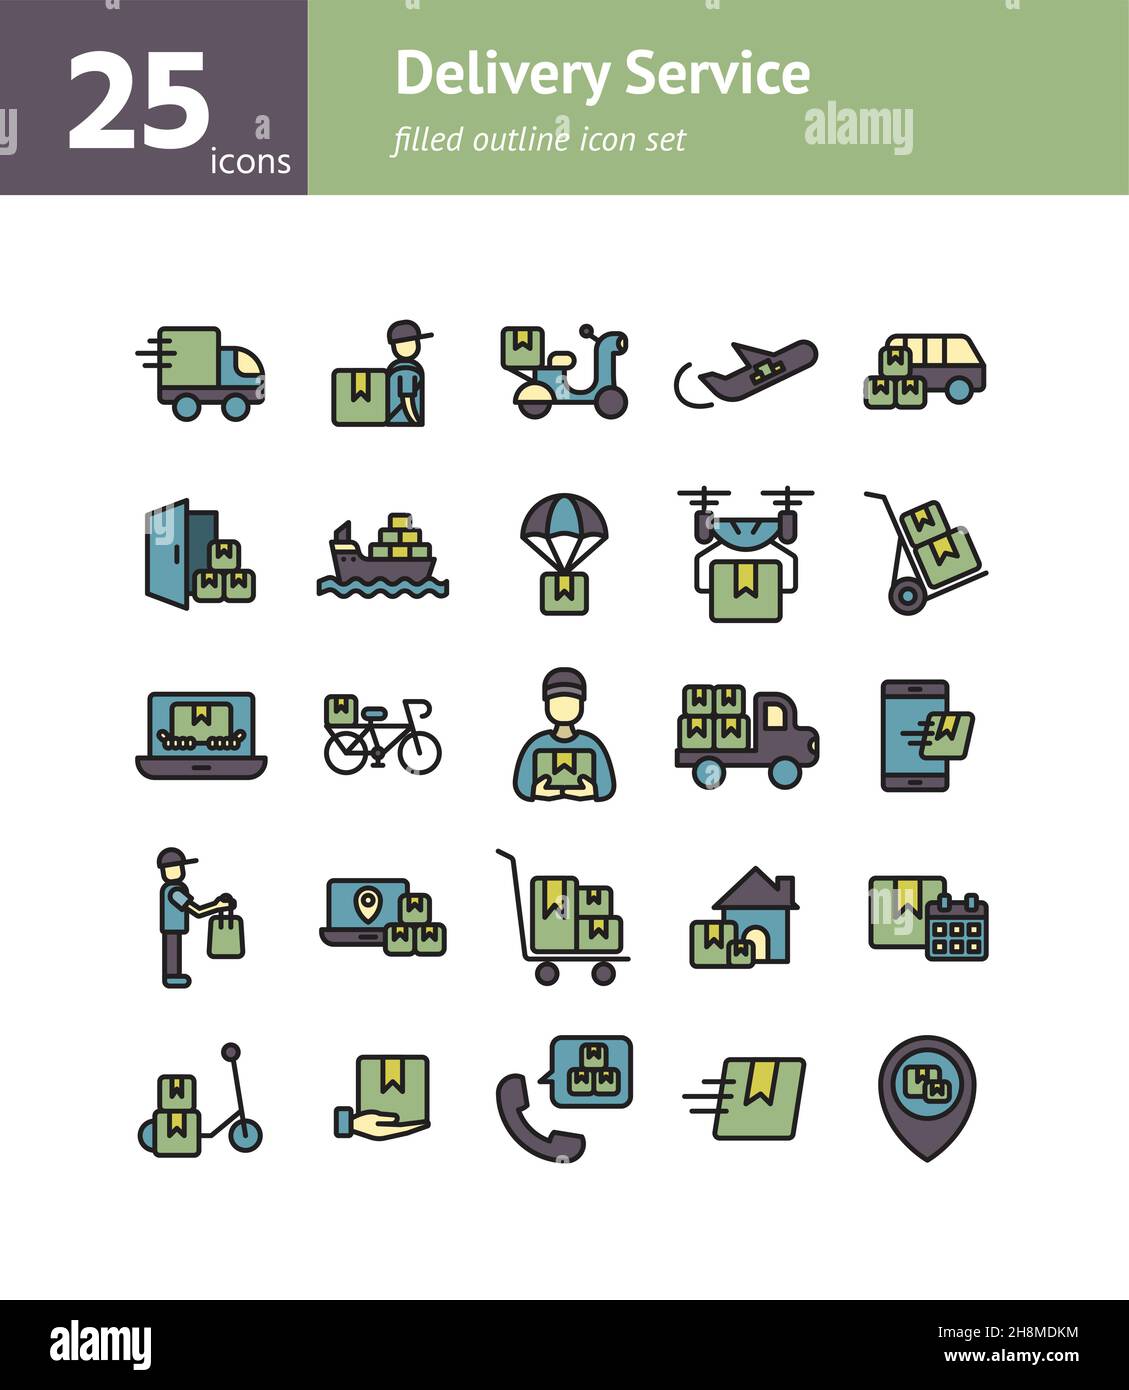 Delivery Service filled outline icon set. Vector and Illustration. Stock Vector